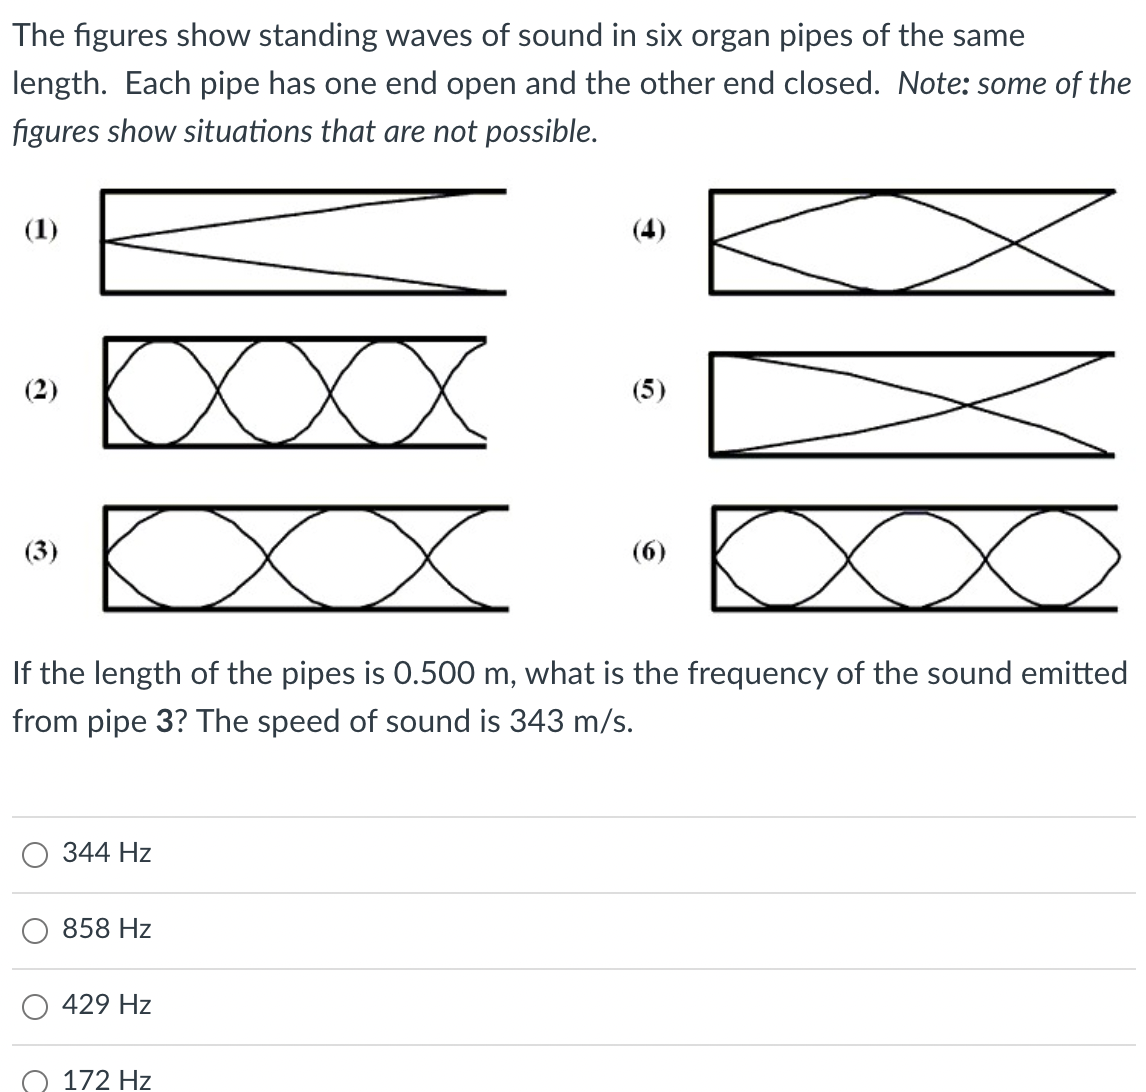 The figures show standing waves of sound in six organ pipes of the same
length. Each pipe has one end open and the other end closed. Note: some of the
figures show situations that are not possible.
(1)
(4)
XXX
(2)
(5)
(3)
(6)
If the length of the pipes is 0.500 m, what is the frequency of the sound emitted
from pipe 3? The speed of sound is 343 m/s.
344 Hz
858 Hz
429 Hz
172 Hz
